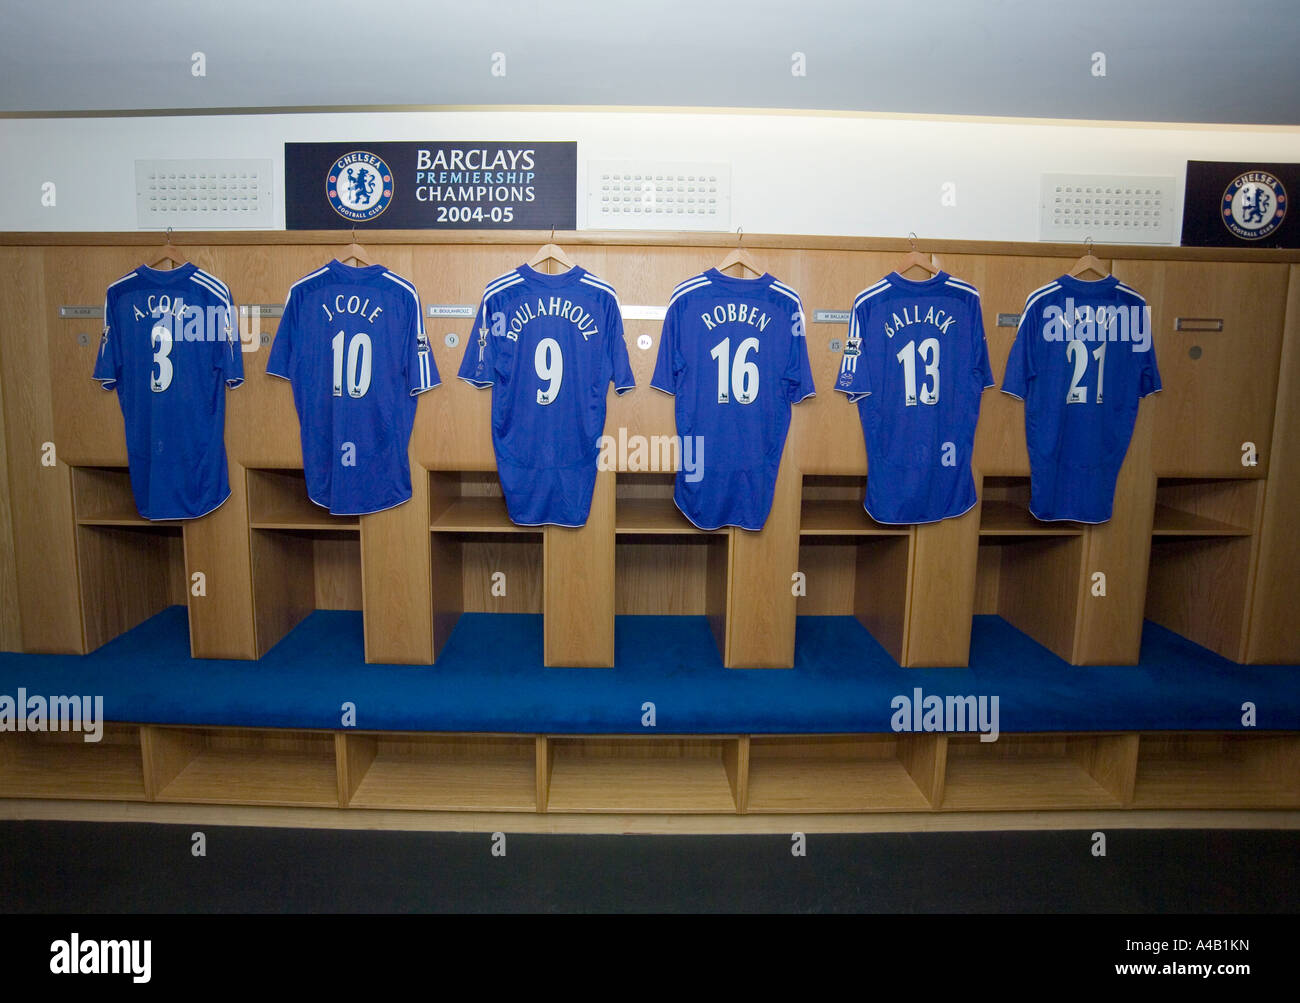 Chelsea football club changing room Stock Photo - Alamy